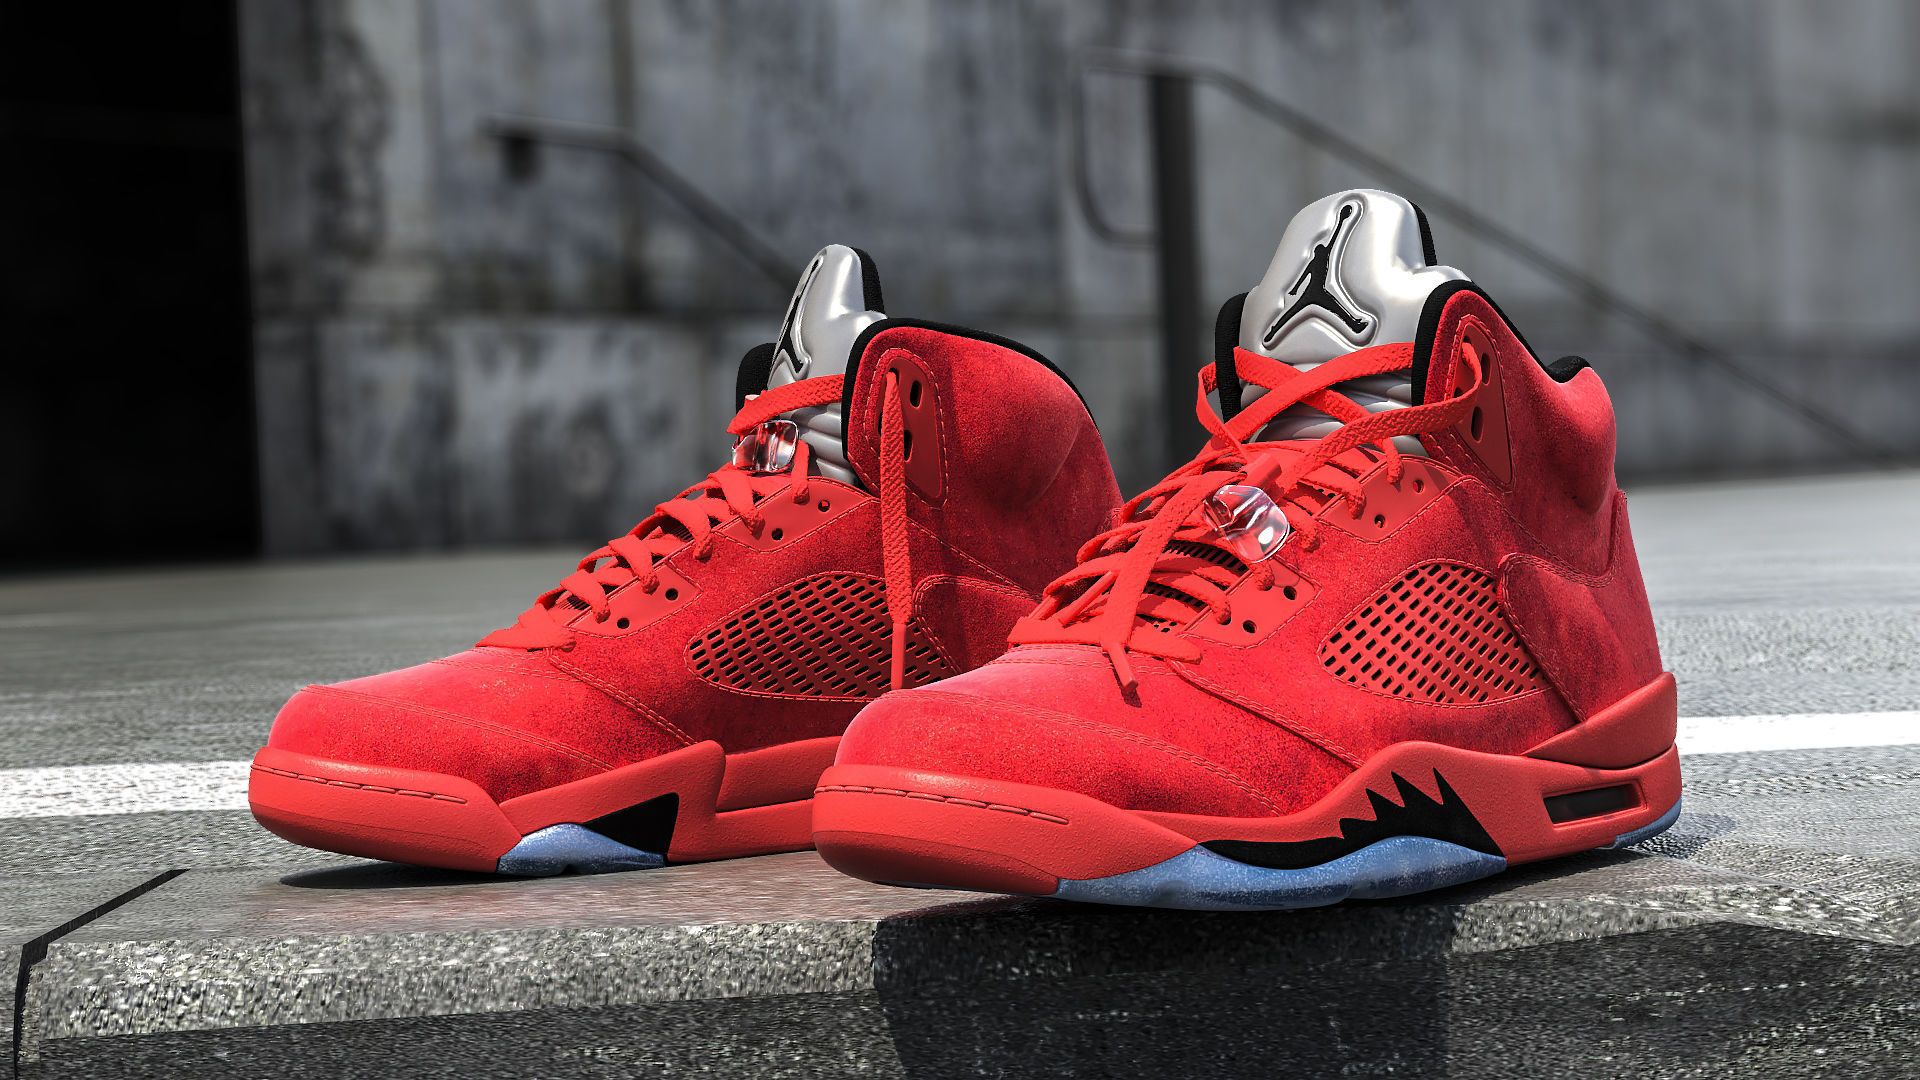 Foot Locker  Too Much   Jordan Retro 5 Toro is now available in  Mens and kids sizes Shop httpsprly6187H0H3P  Facebook